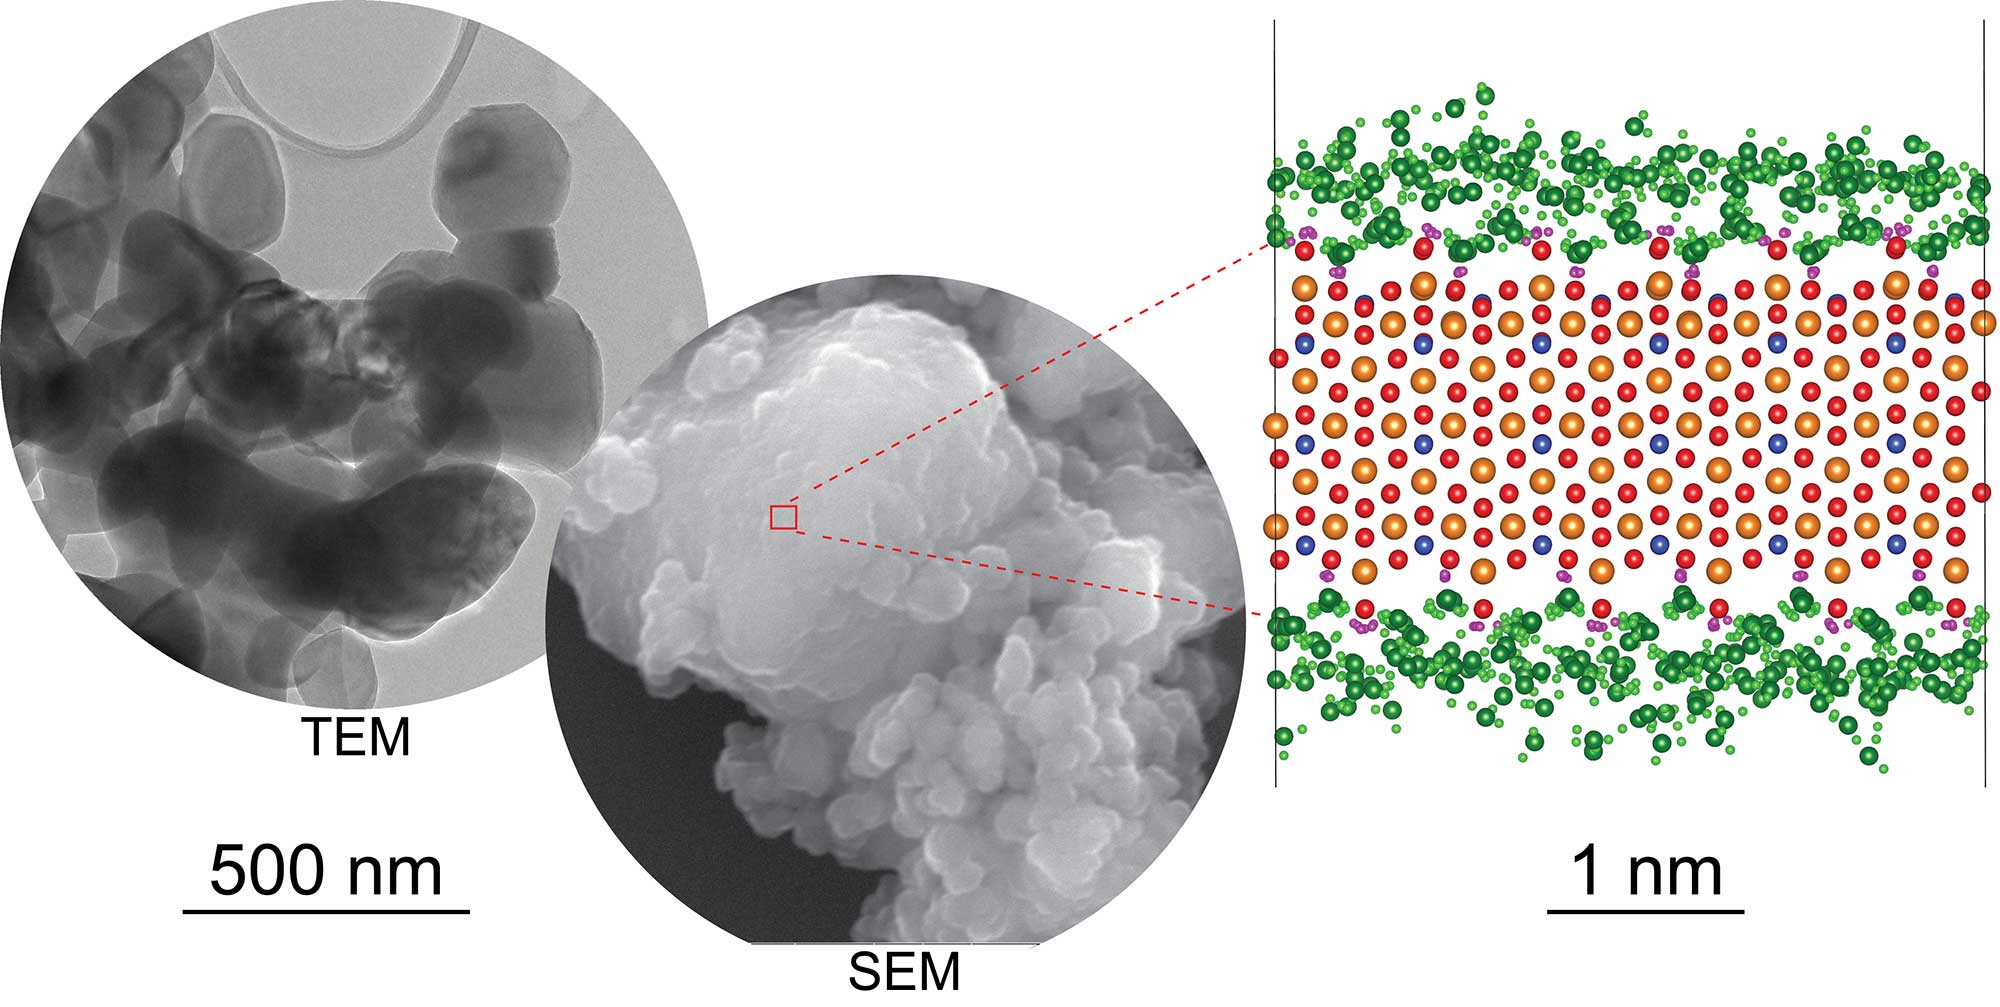 Researchers used a combination of QENS experiments and molecular dynamics simulations to quantify the structure and dynamics of water on olivine’s surface. Water molecules (green) form three distinct layers on the surface of olivine (red, gold, and blue). Credit: Reproduced from Liu et al., with permission from the Royal Society of Chemistry.